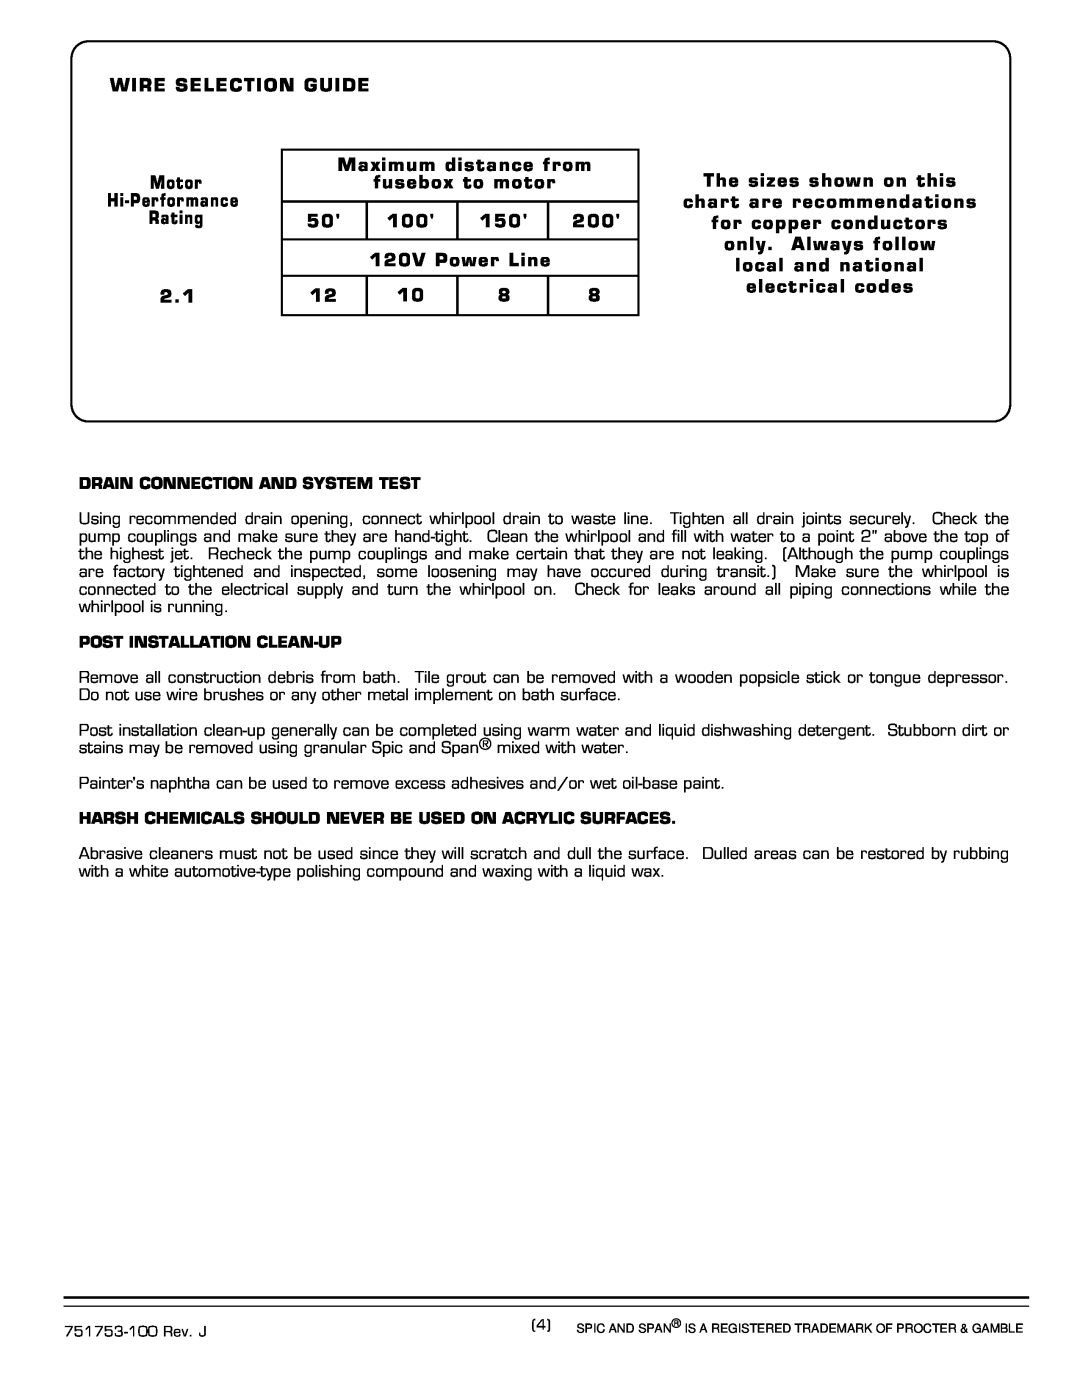 American Standard 2709.XXXW installation instructions Wire Selection Guide 